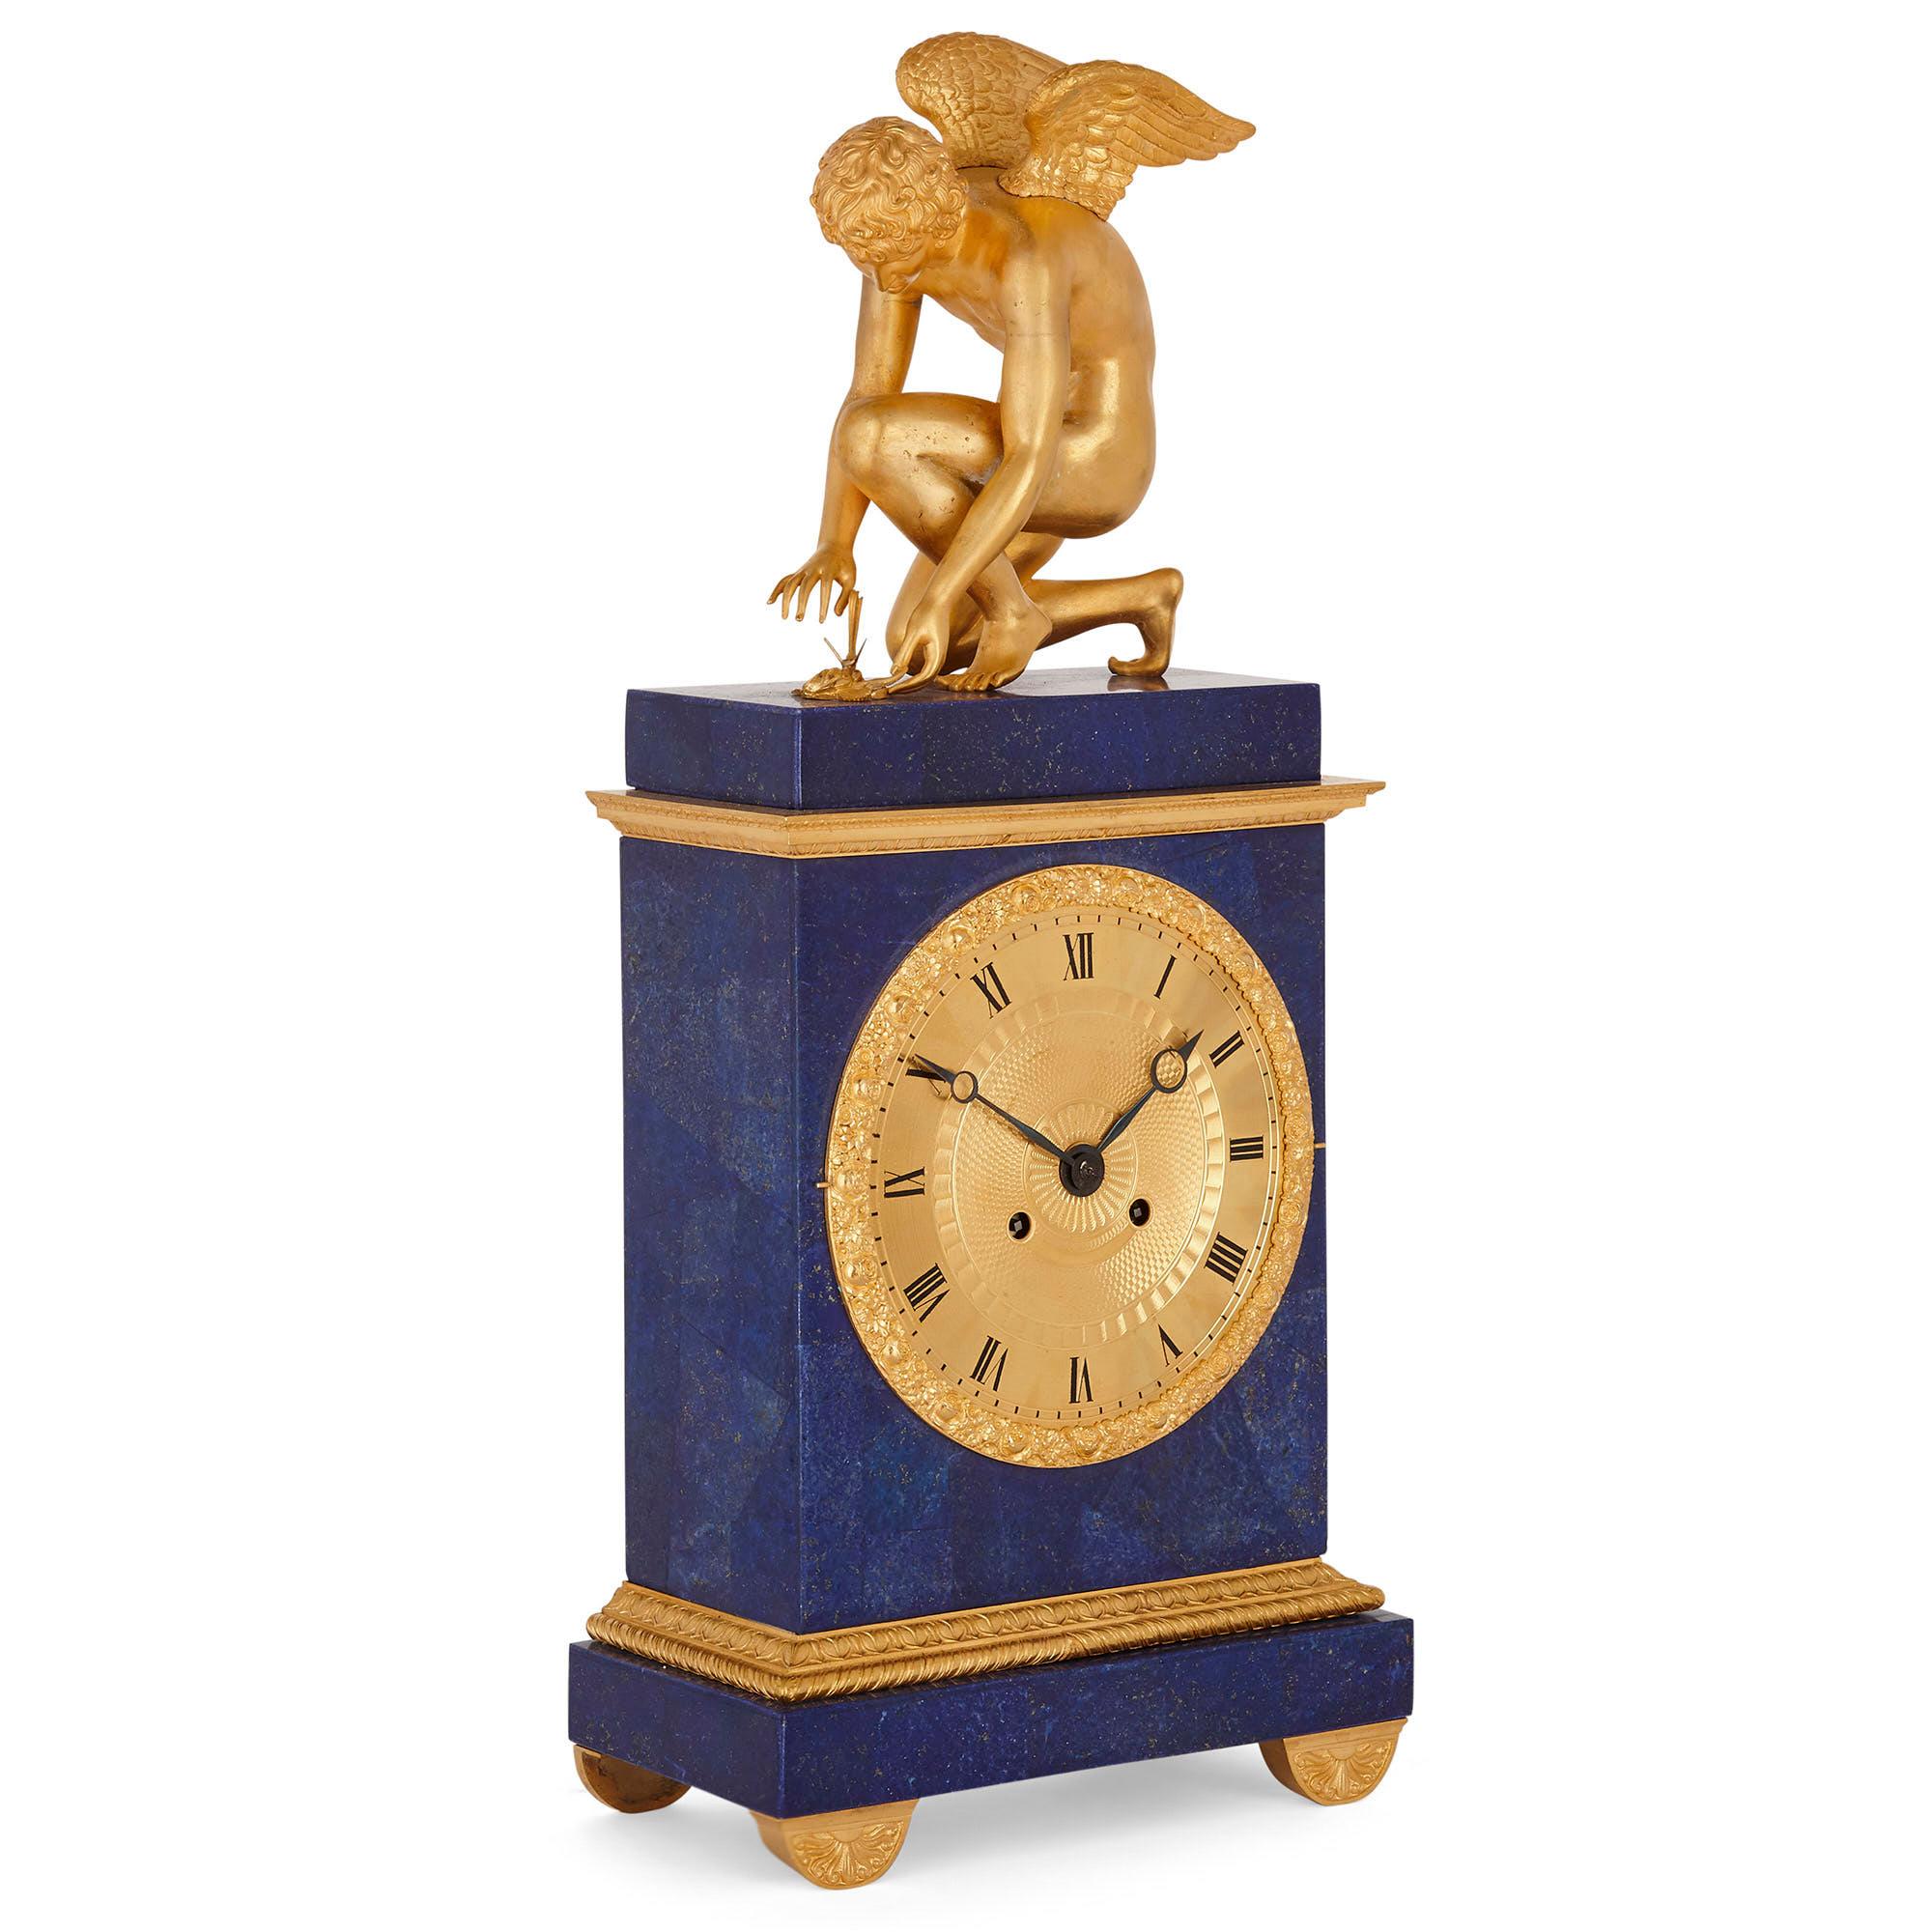 Charles X lapis and gilt bronze mantel clock
French, circa 1830
Measures: Height 56cm, width 25cm, depth 13cm

This finely modeled Charles X period clock with later lapis lazuli veneered decoration is a superb example of early 19th century